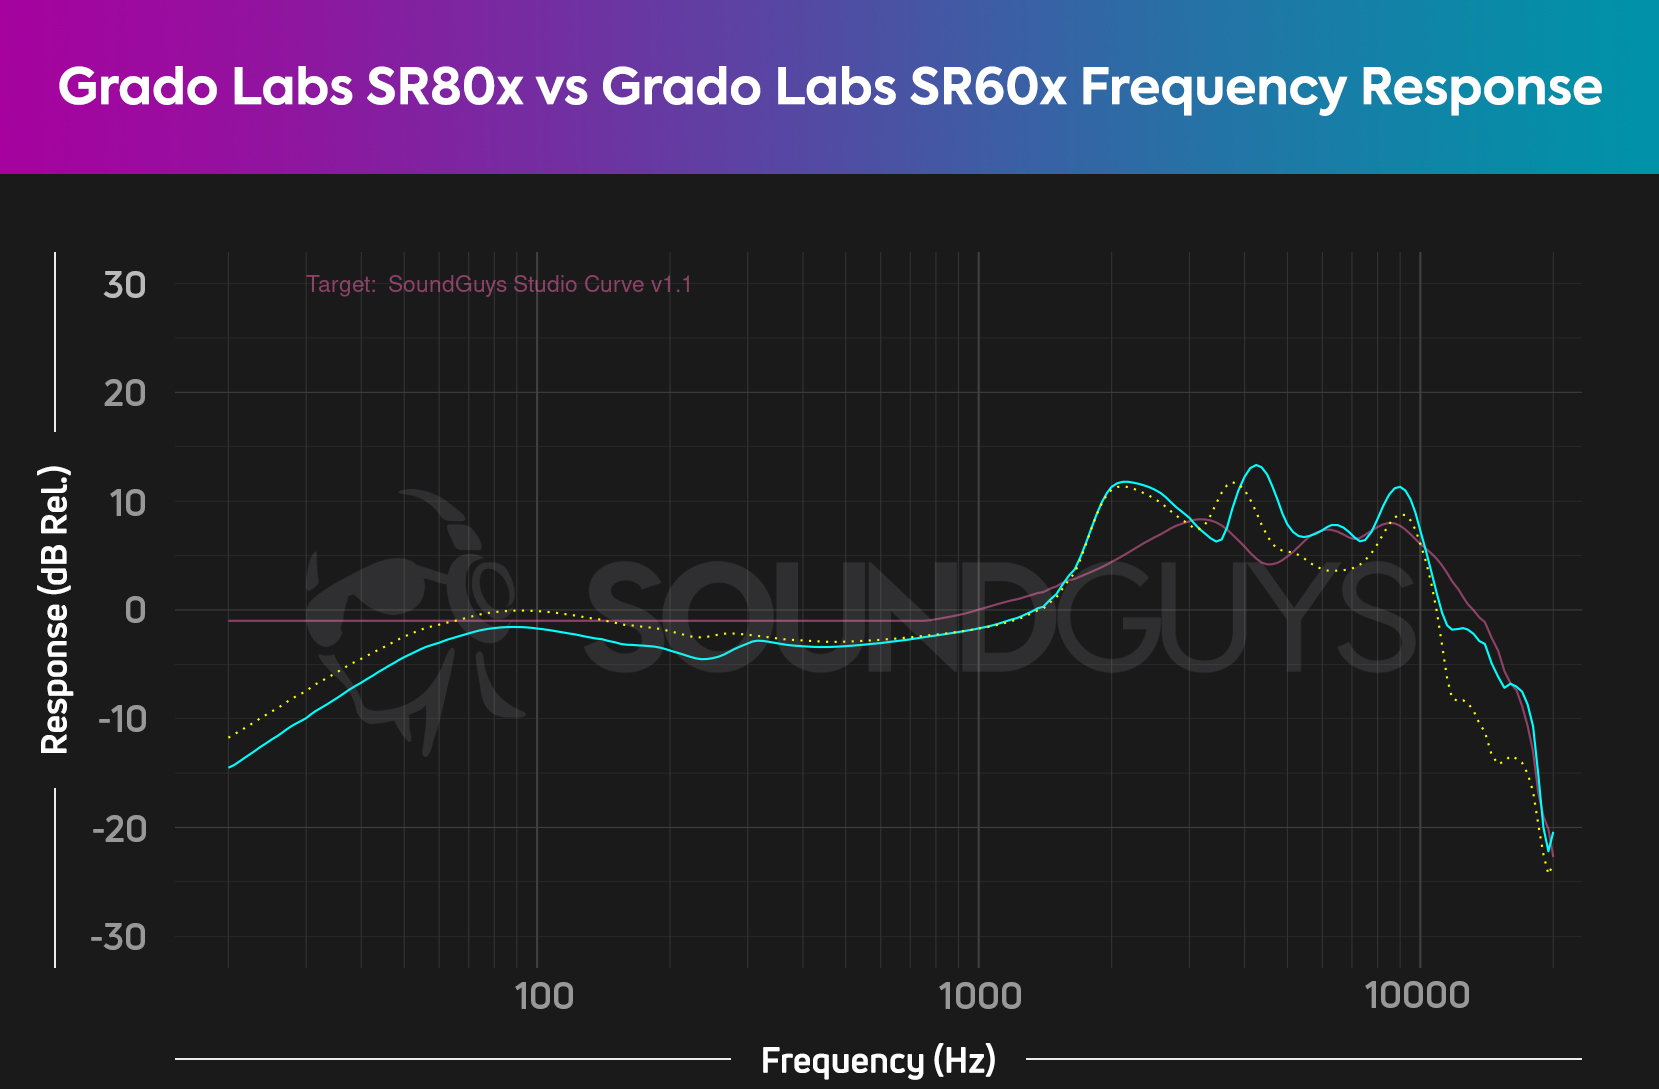 Three frequency responses are shown, one of the Grado Labs SR80x, another of the Grado Labs SR60x, and our studio house curve.